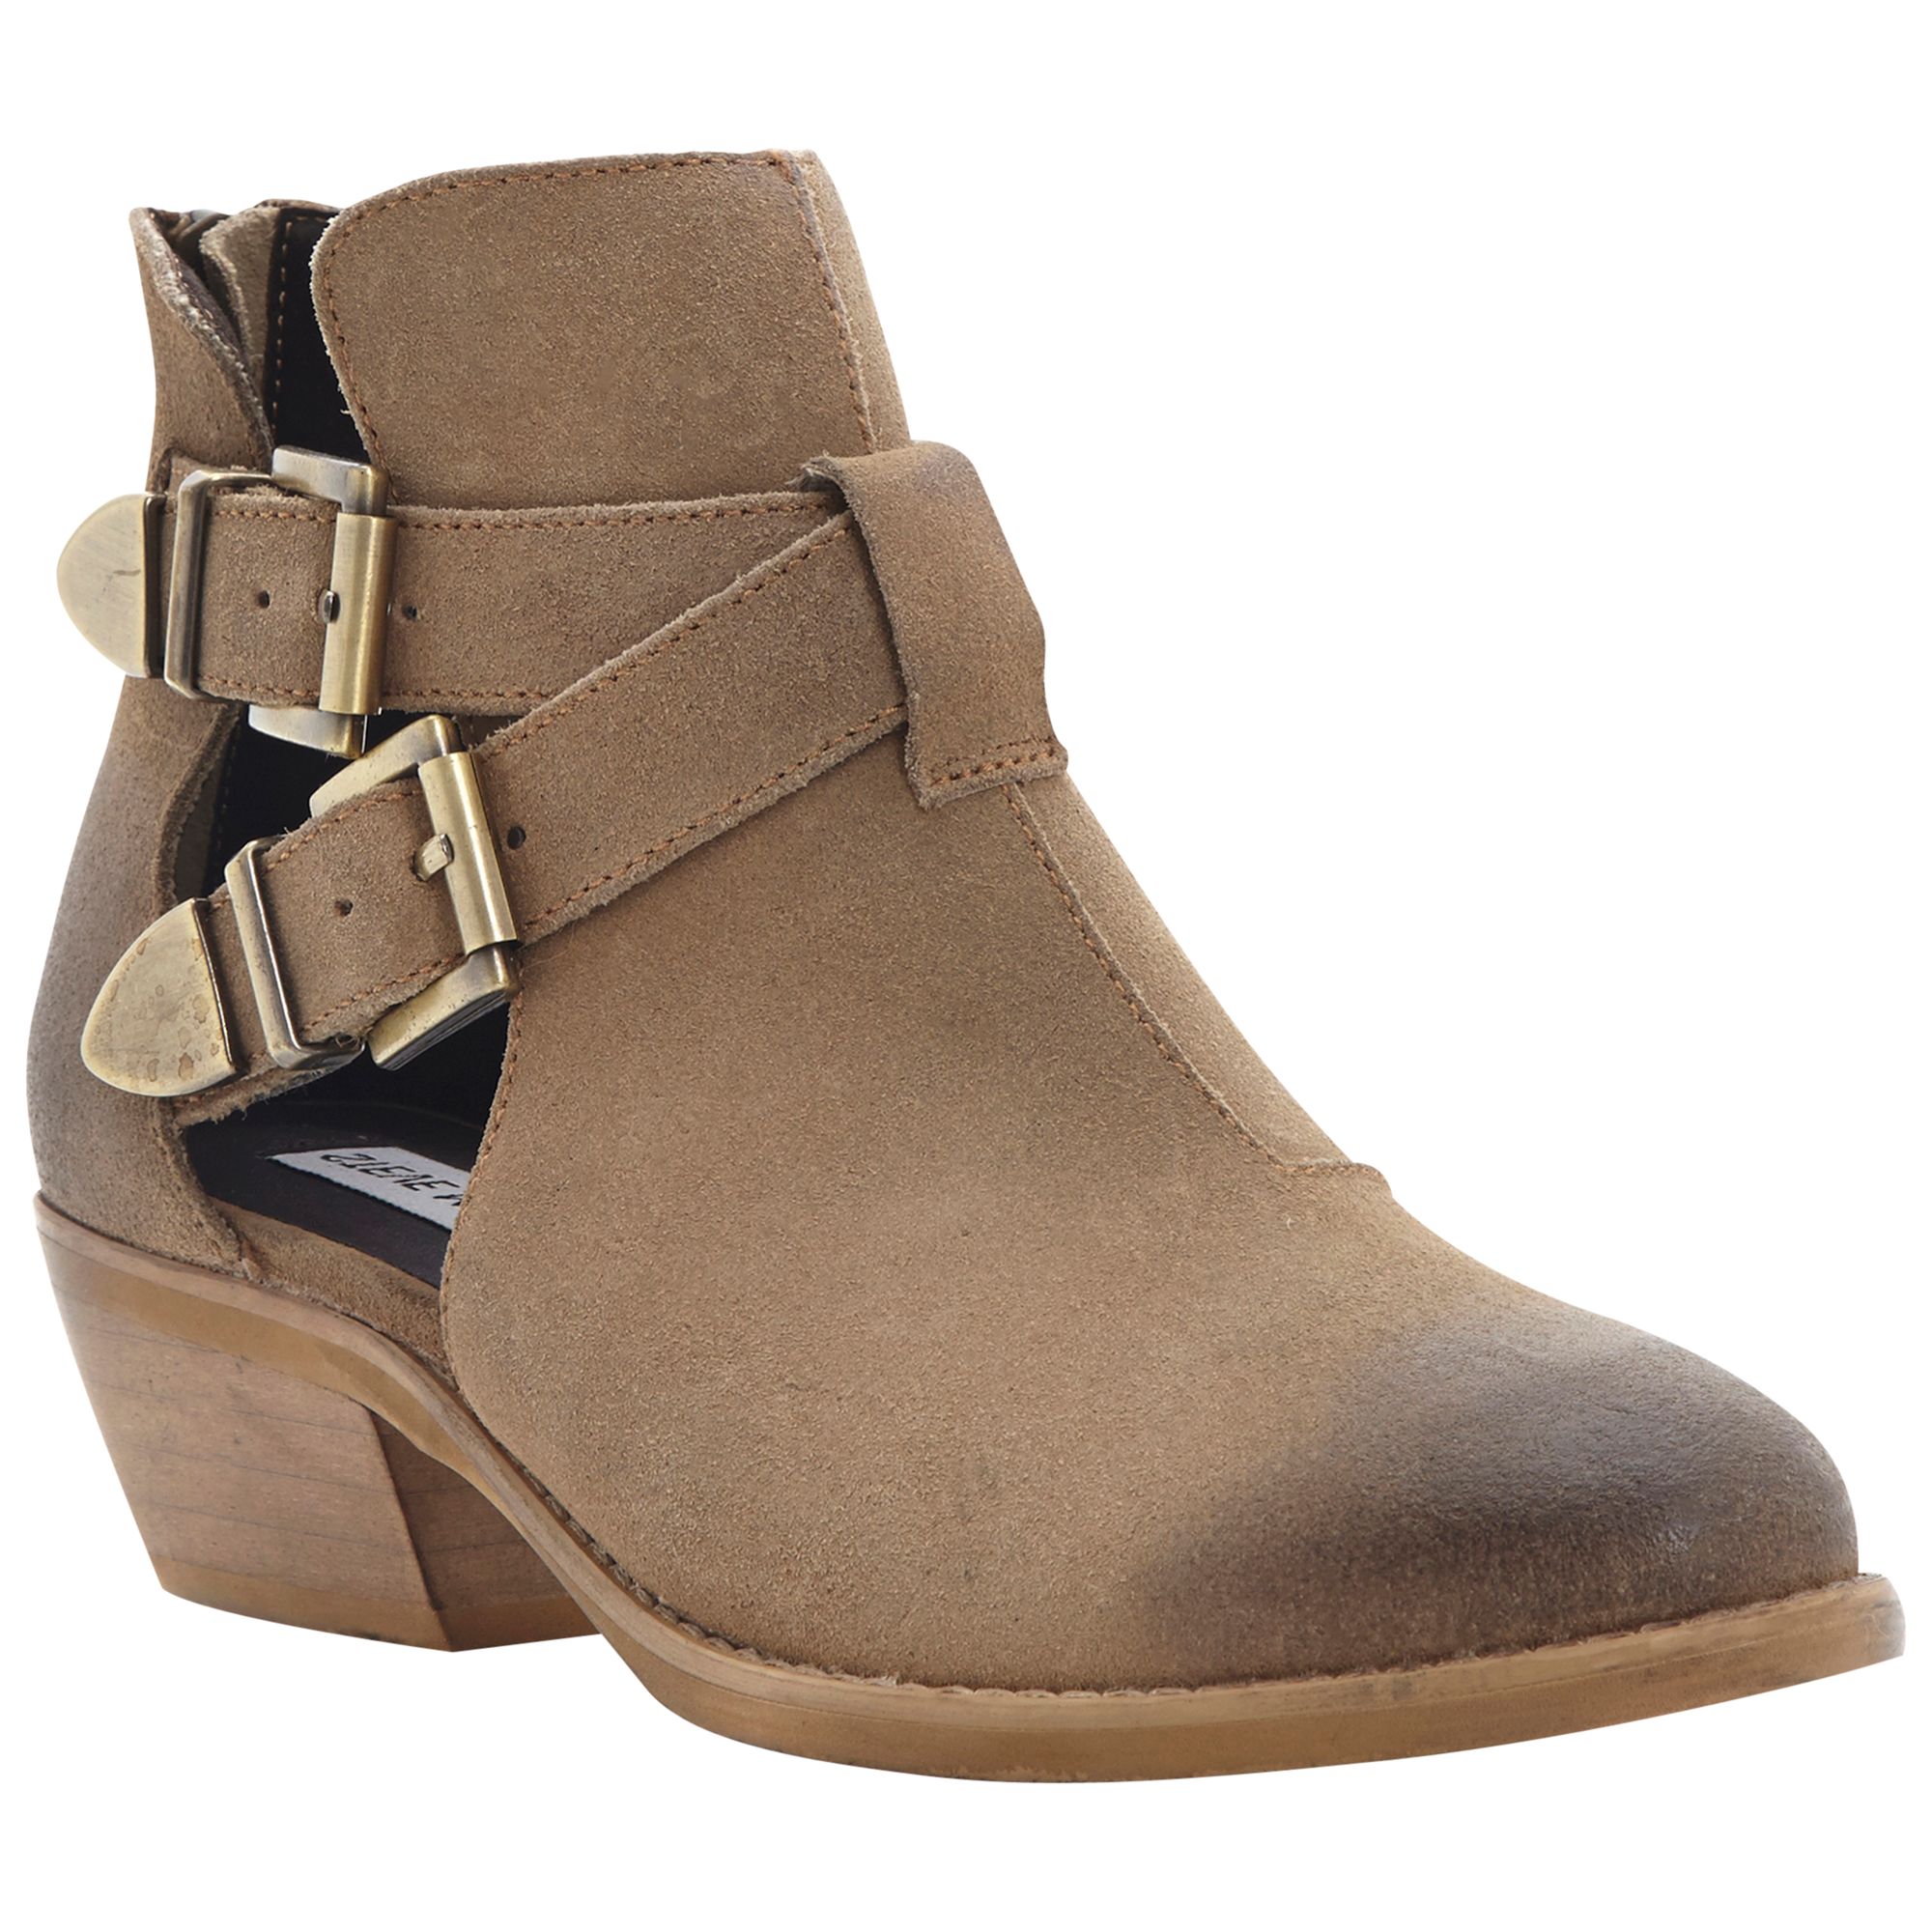 Steve Madden Cinch Suede Ankle Boots, Taupe at John Lewis & Partners